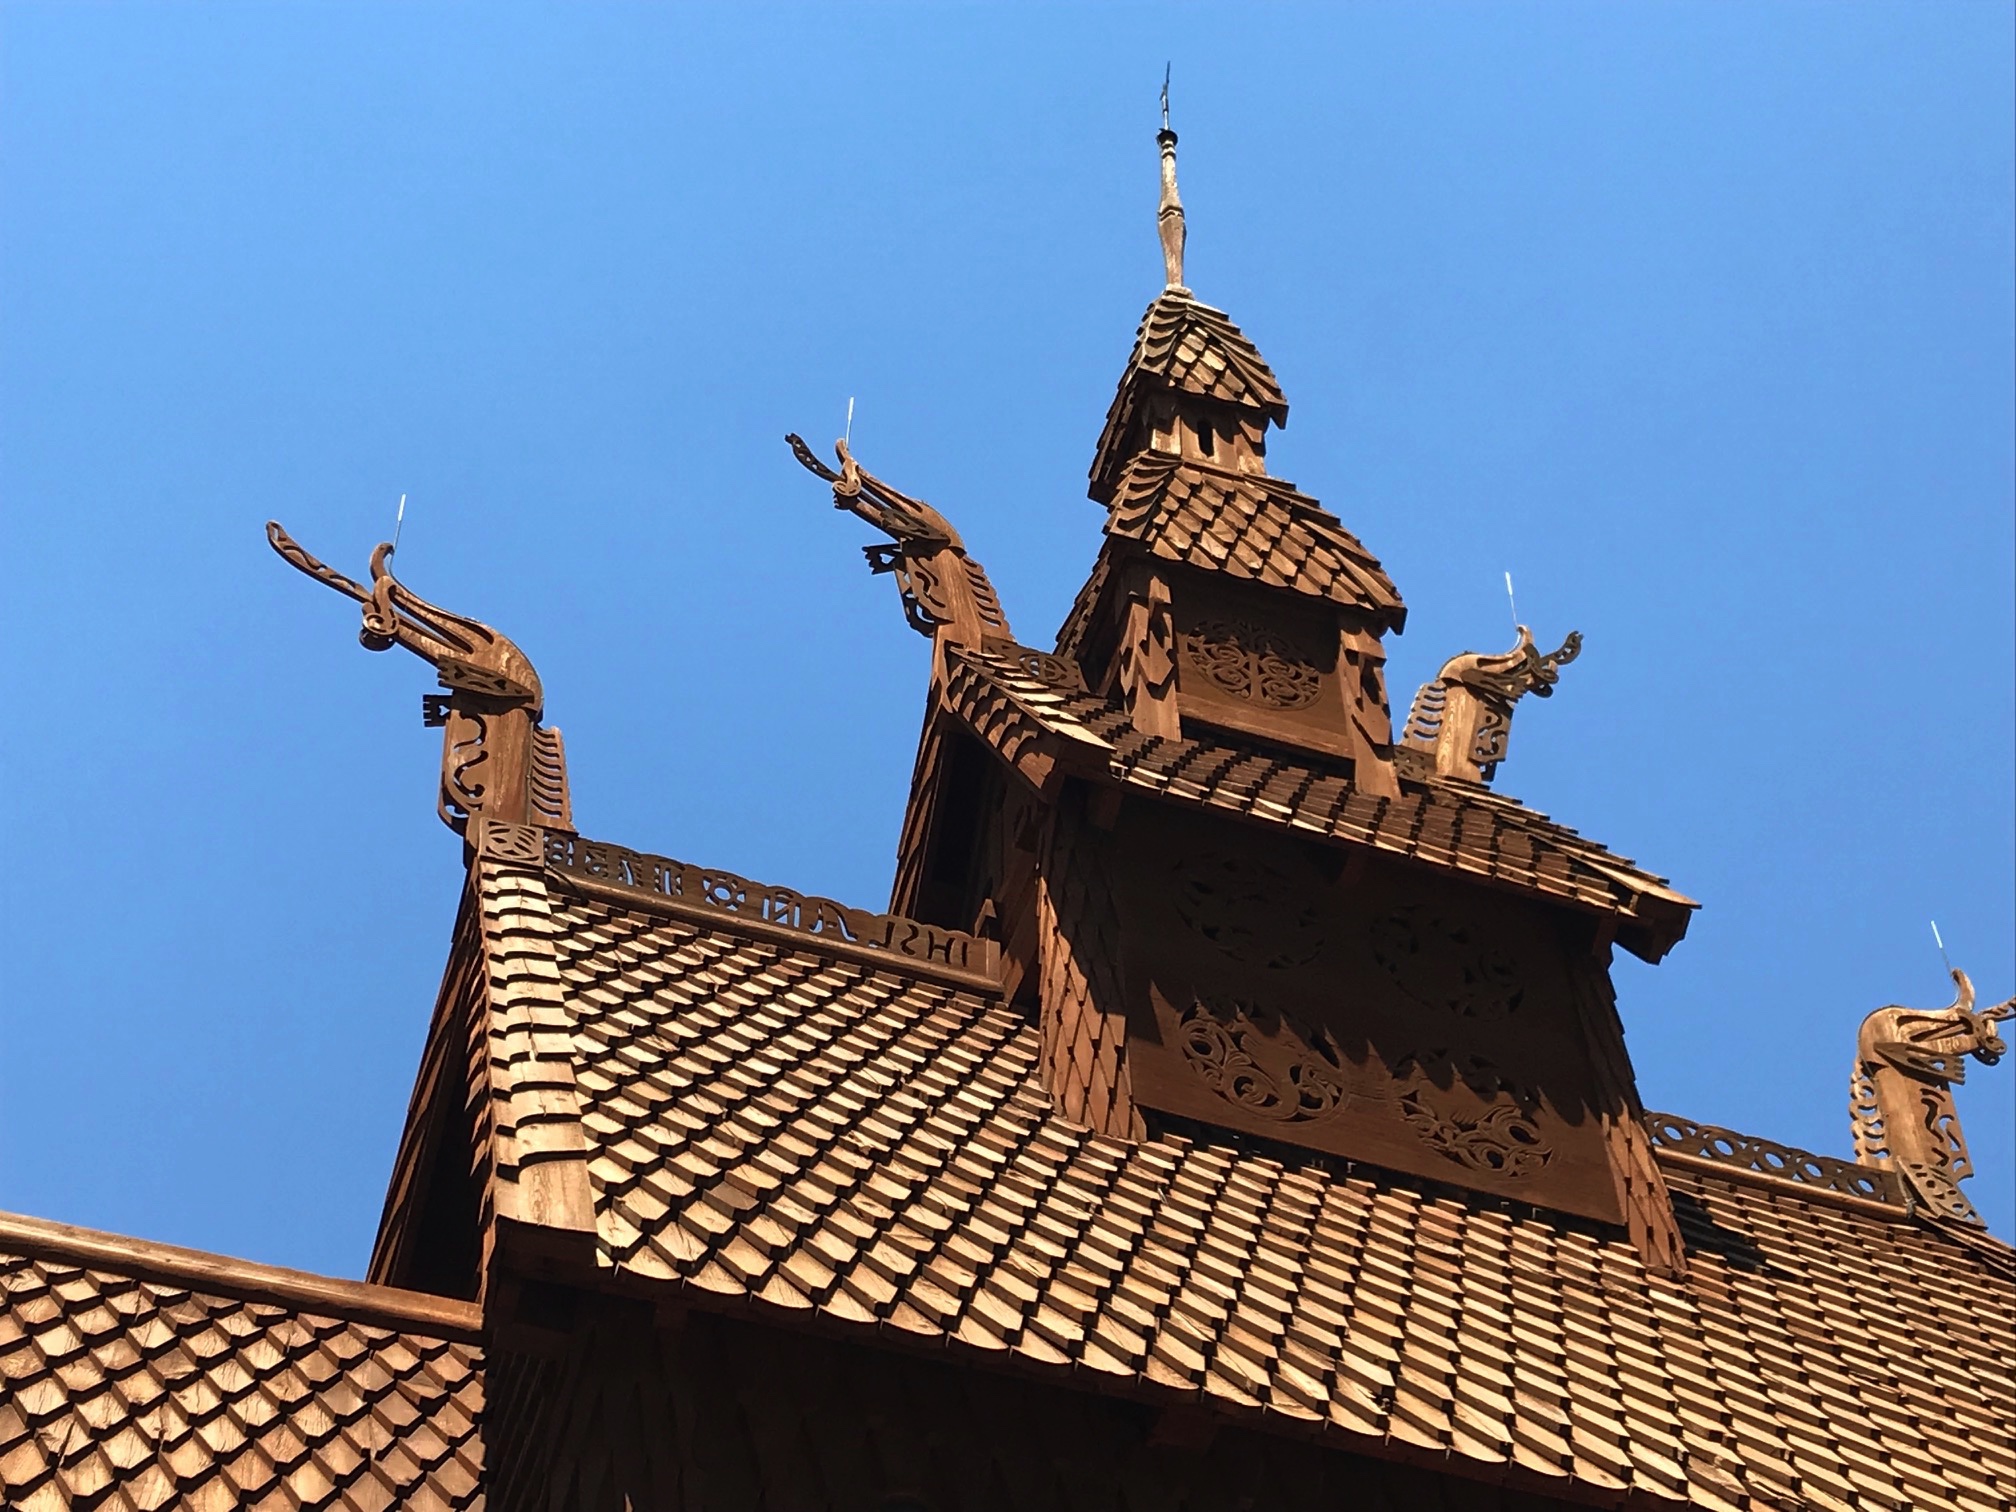 The roof of a wooden church with unique wooden sculptures and steeple on the top